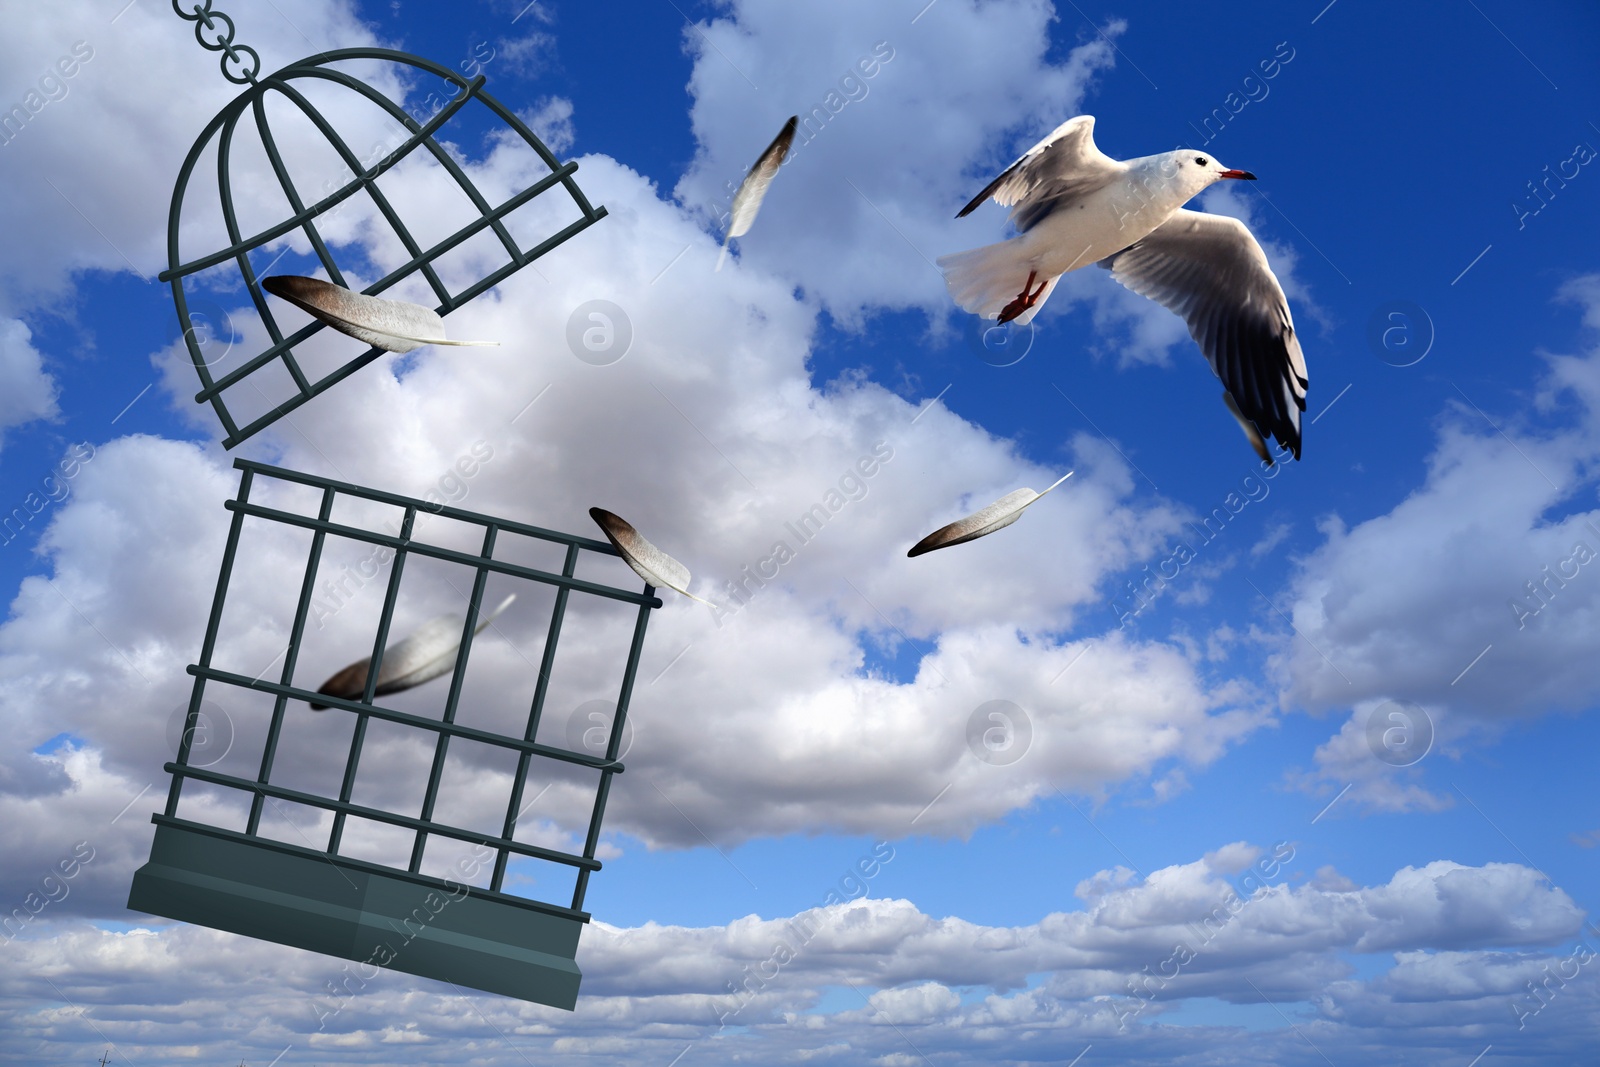 Image of Freedom. Bird flying out of cage into sky